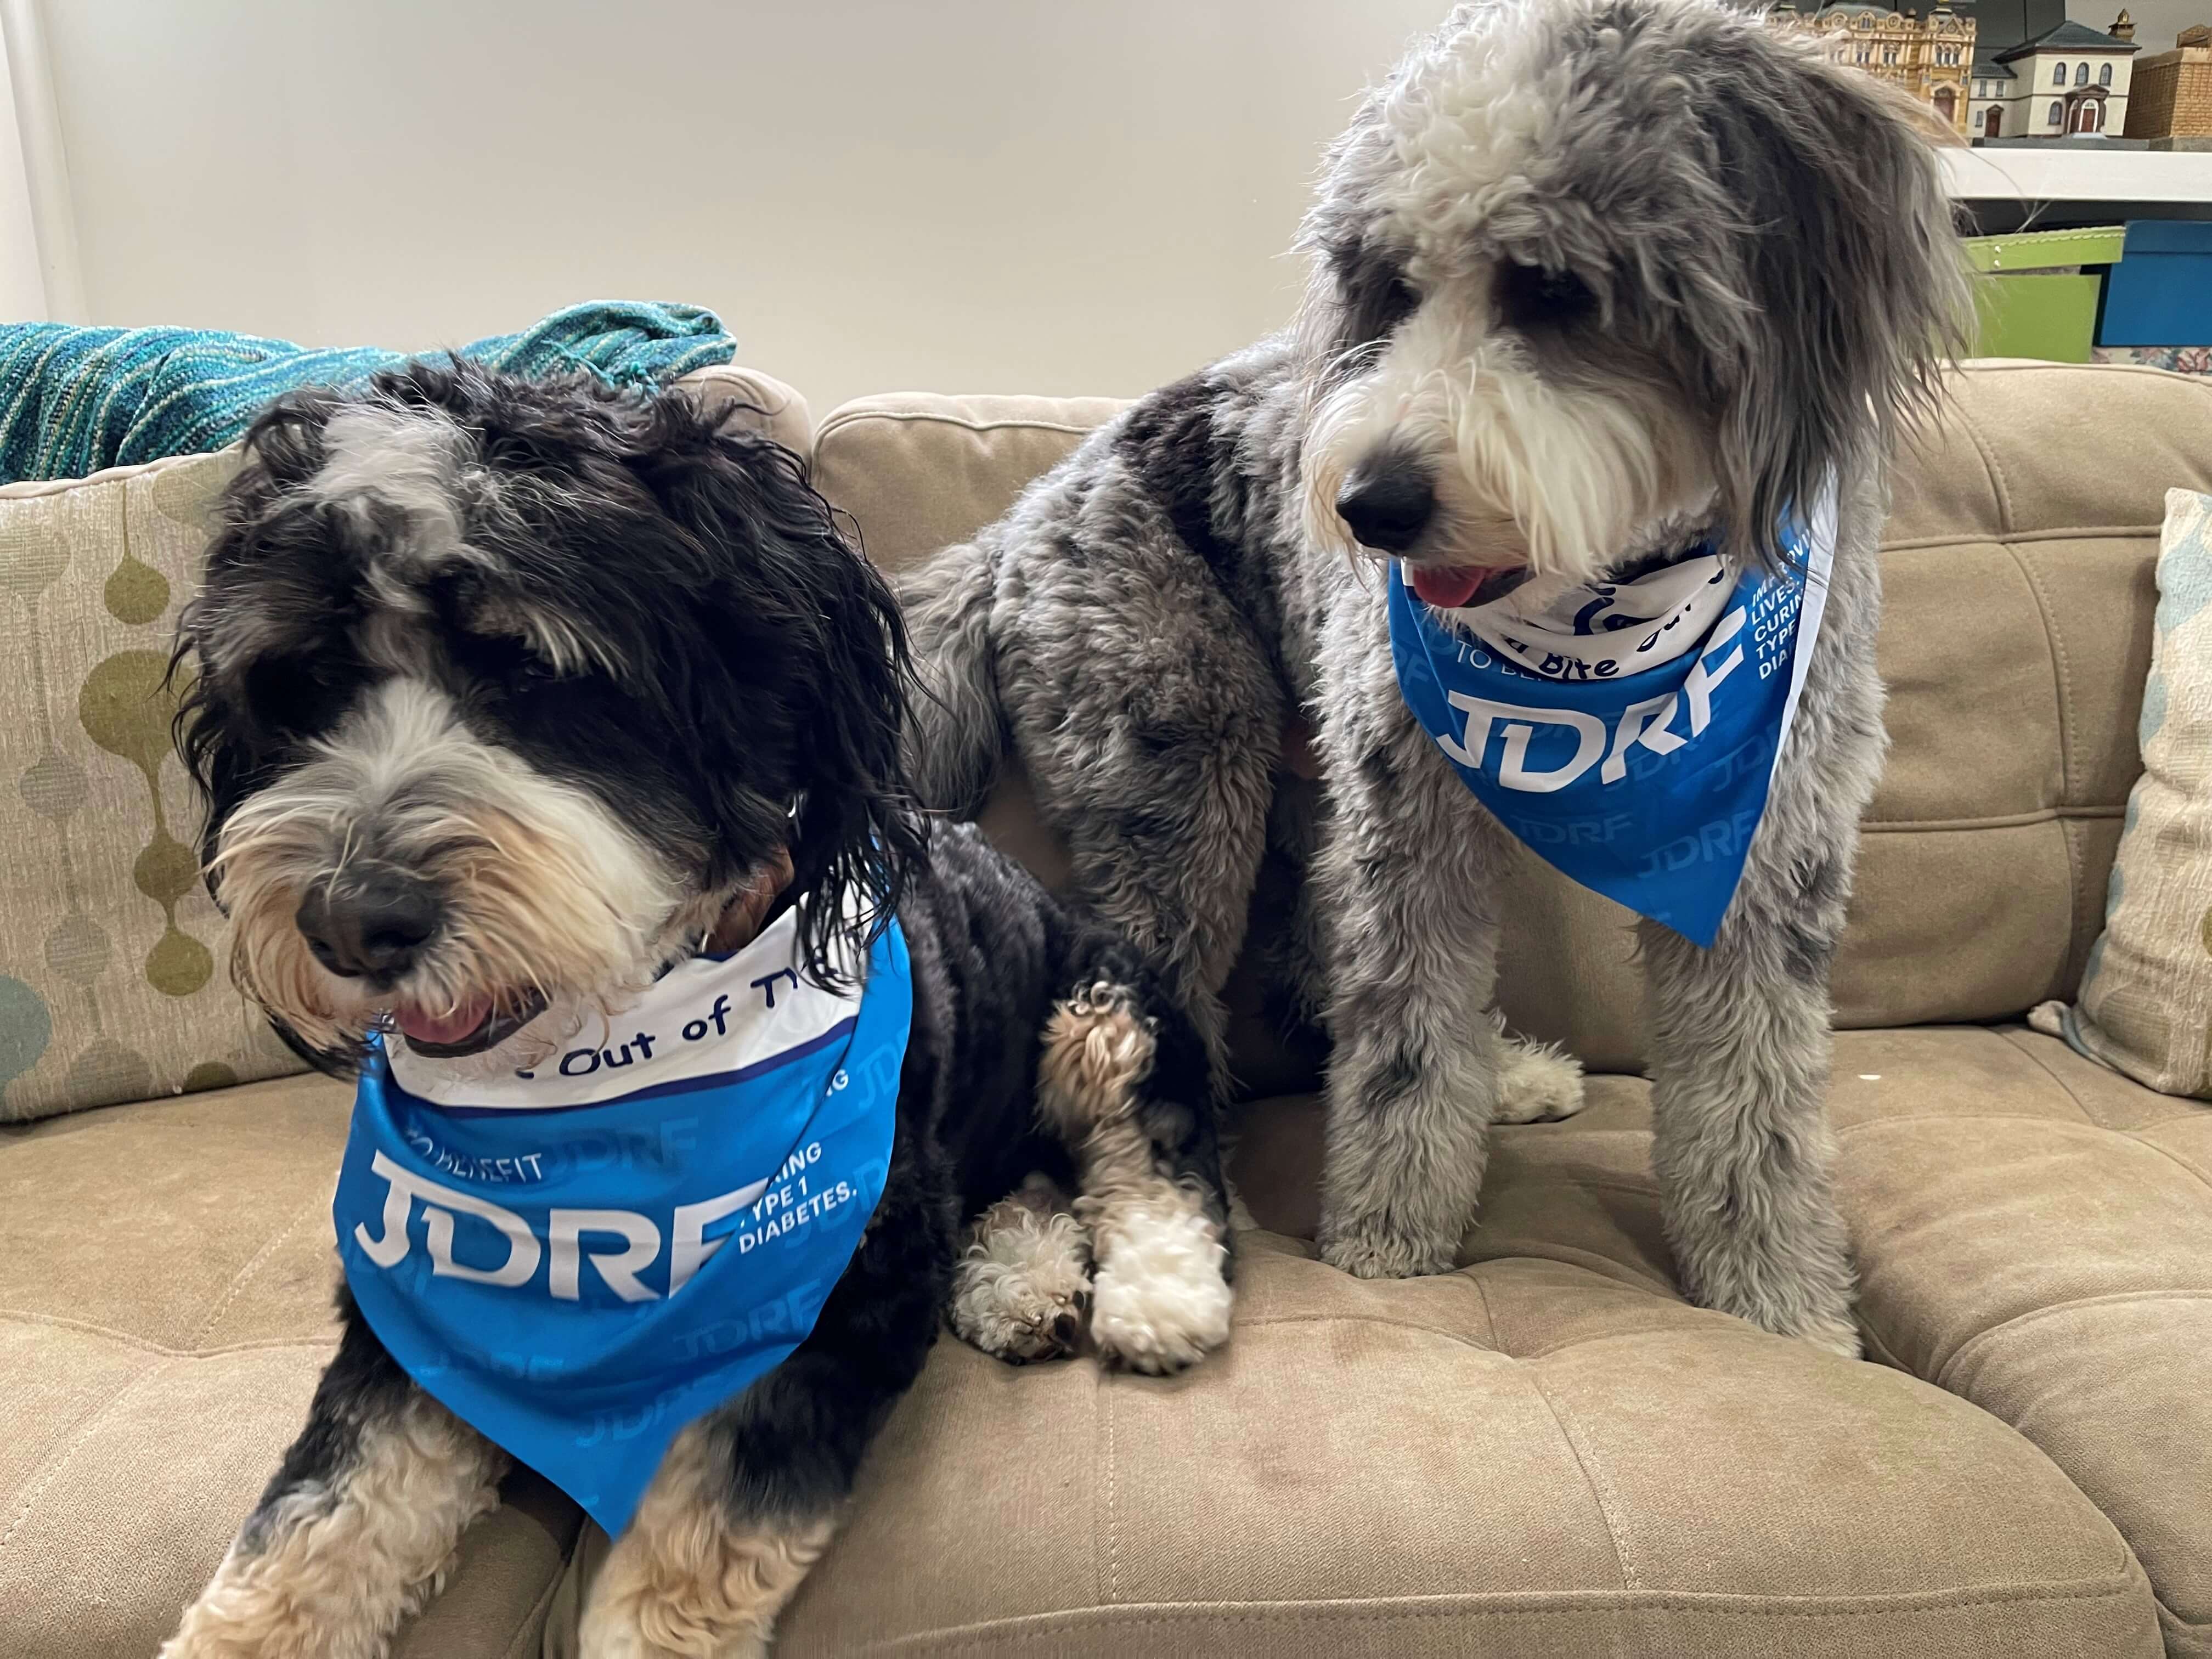 Max and Oliver model the bandanas used as a fundraiser for the Juvenile Diabetes Research Foundation.  Our fur friends like to be chic too when participating in the Fundraising Walk!